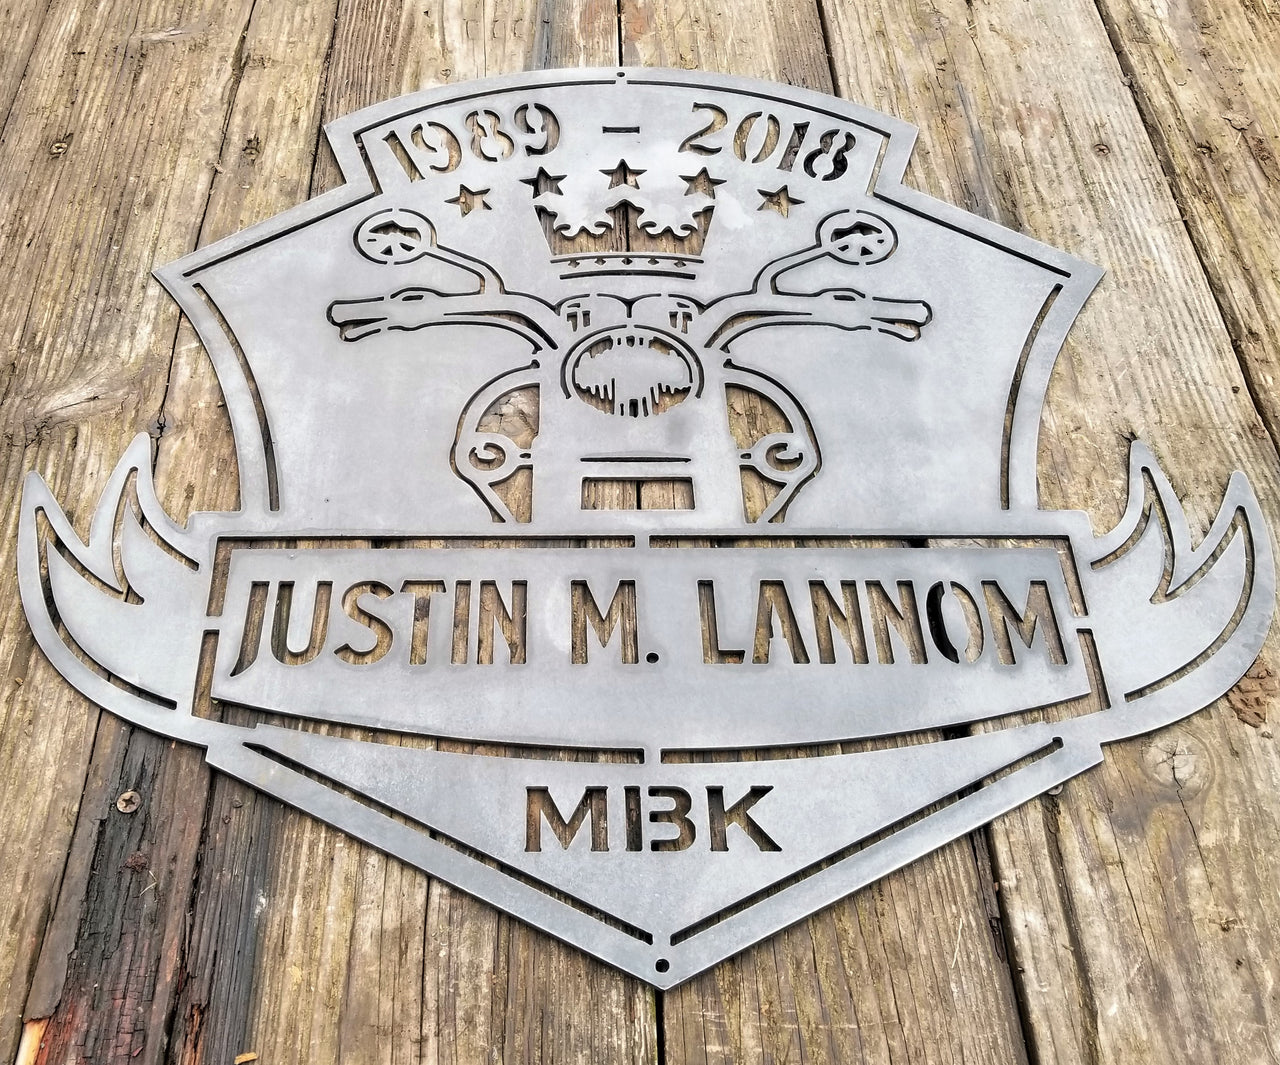 This is a memorial sign with an established year, dipicting an image of a motorcylce.  The bottom has a name and reads, "Justin M. Lannom".